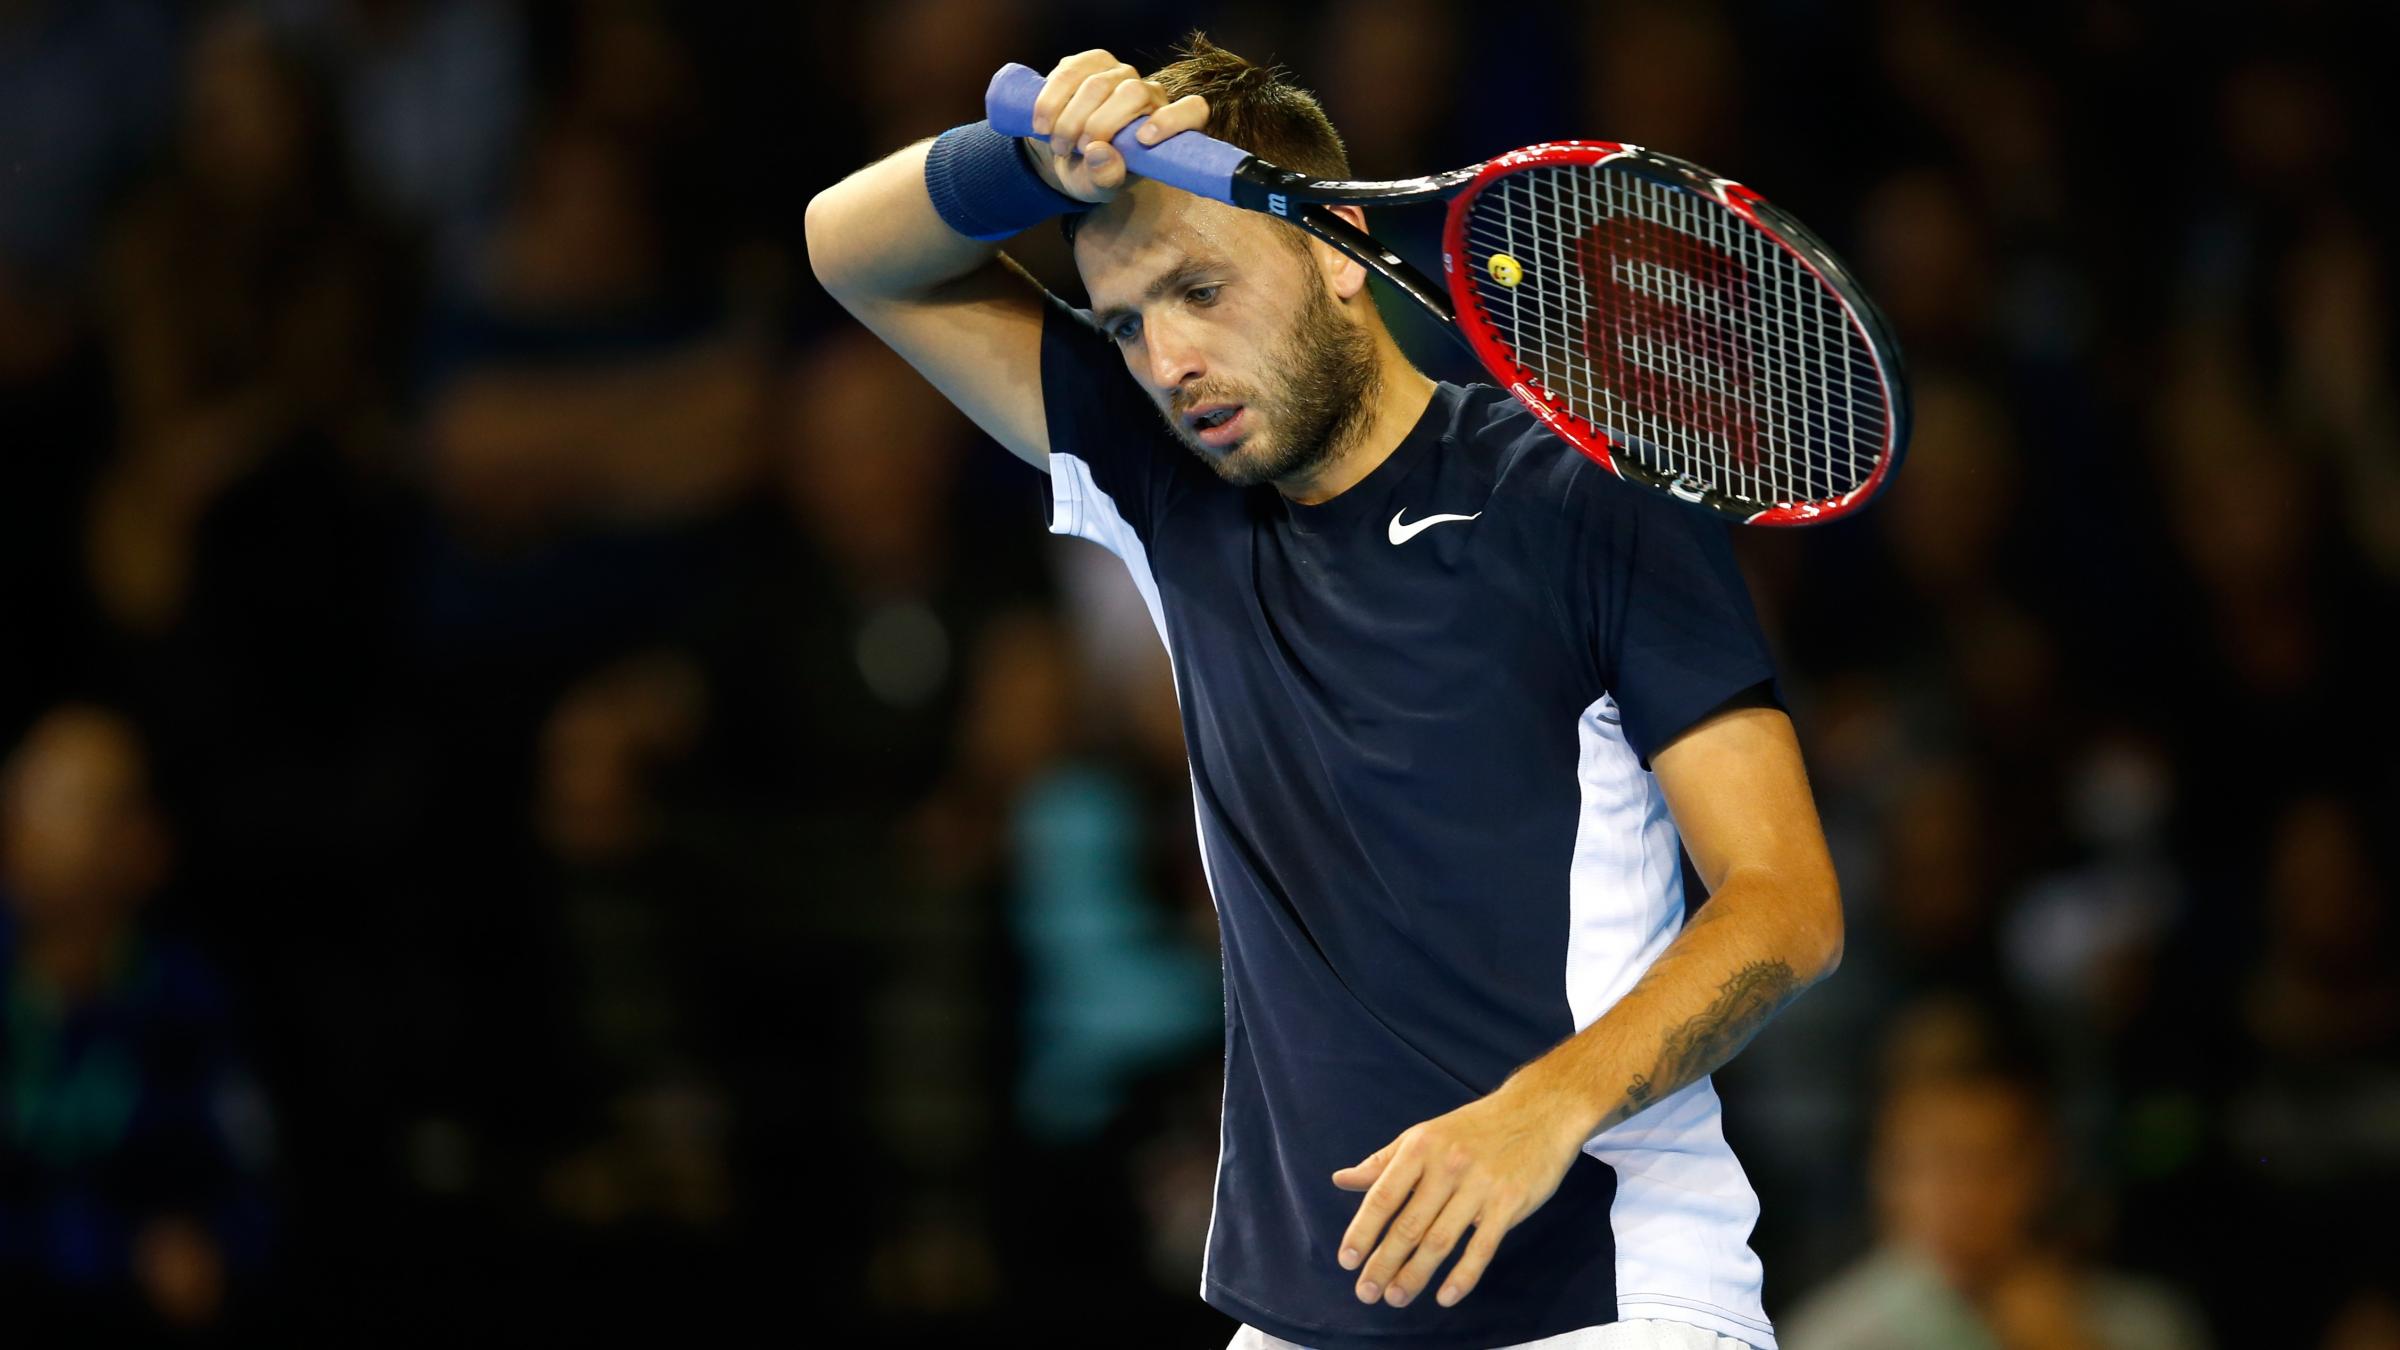 Dan Evans falls to Gael Monfils in second round at Dubai Duty Free Championships - Wales Farmer